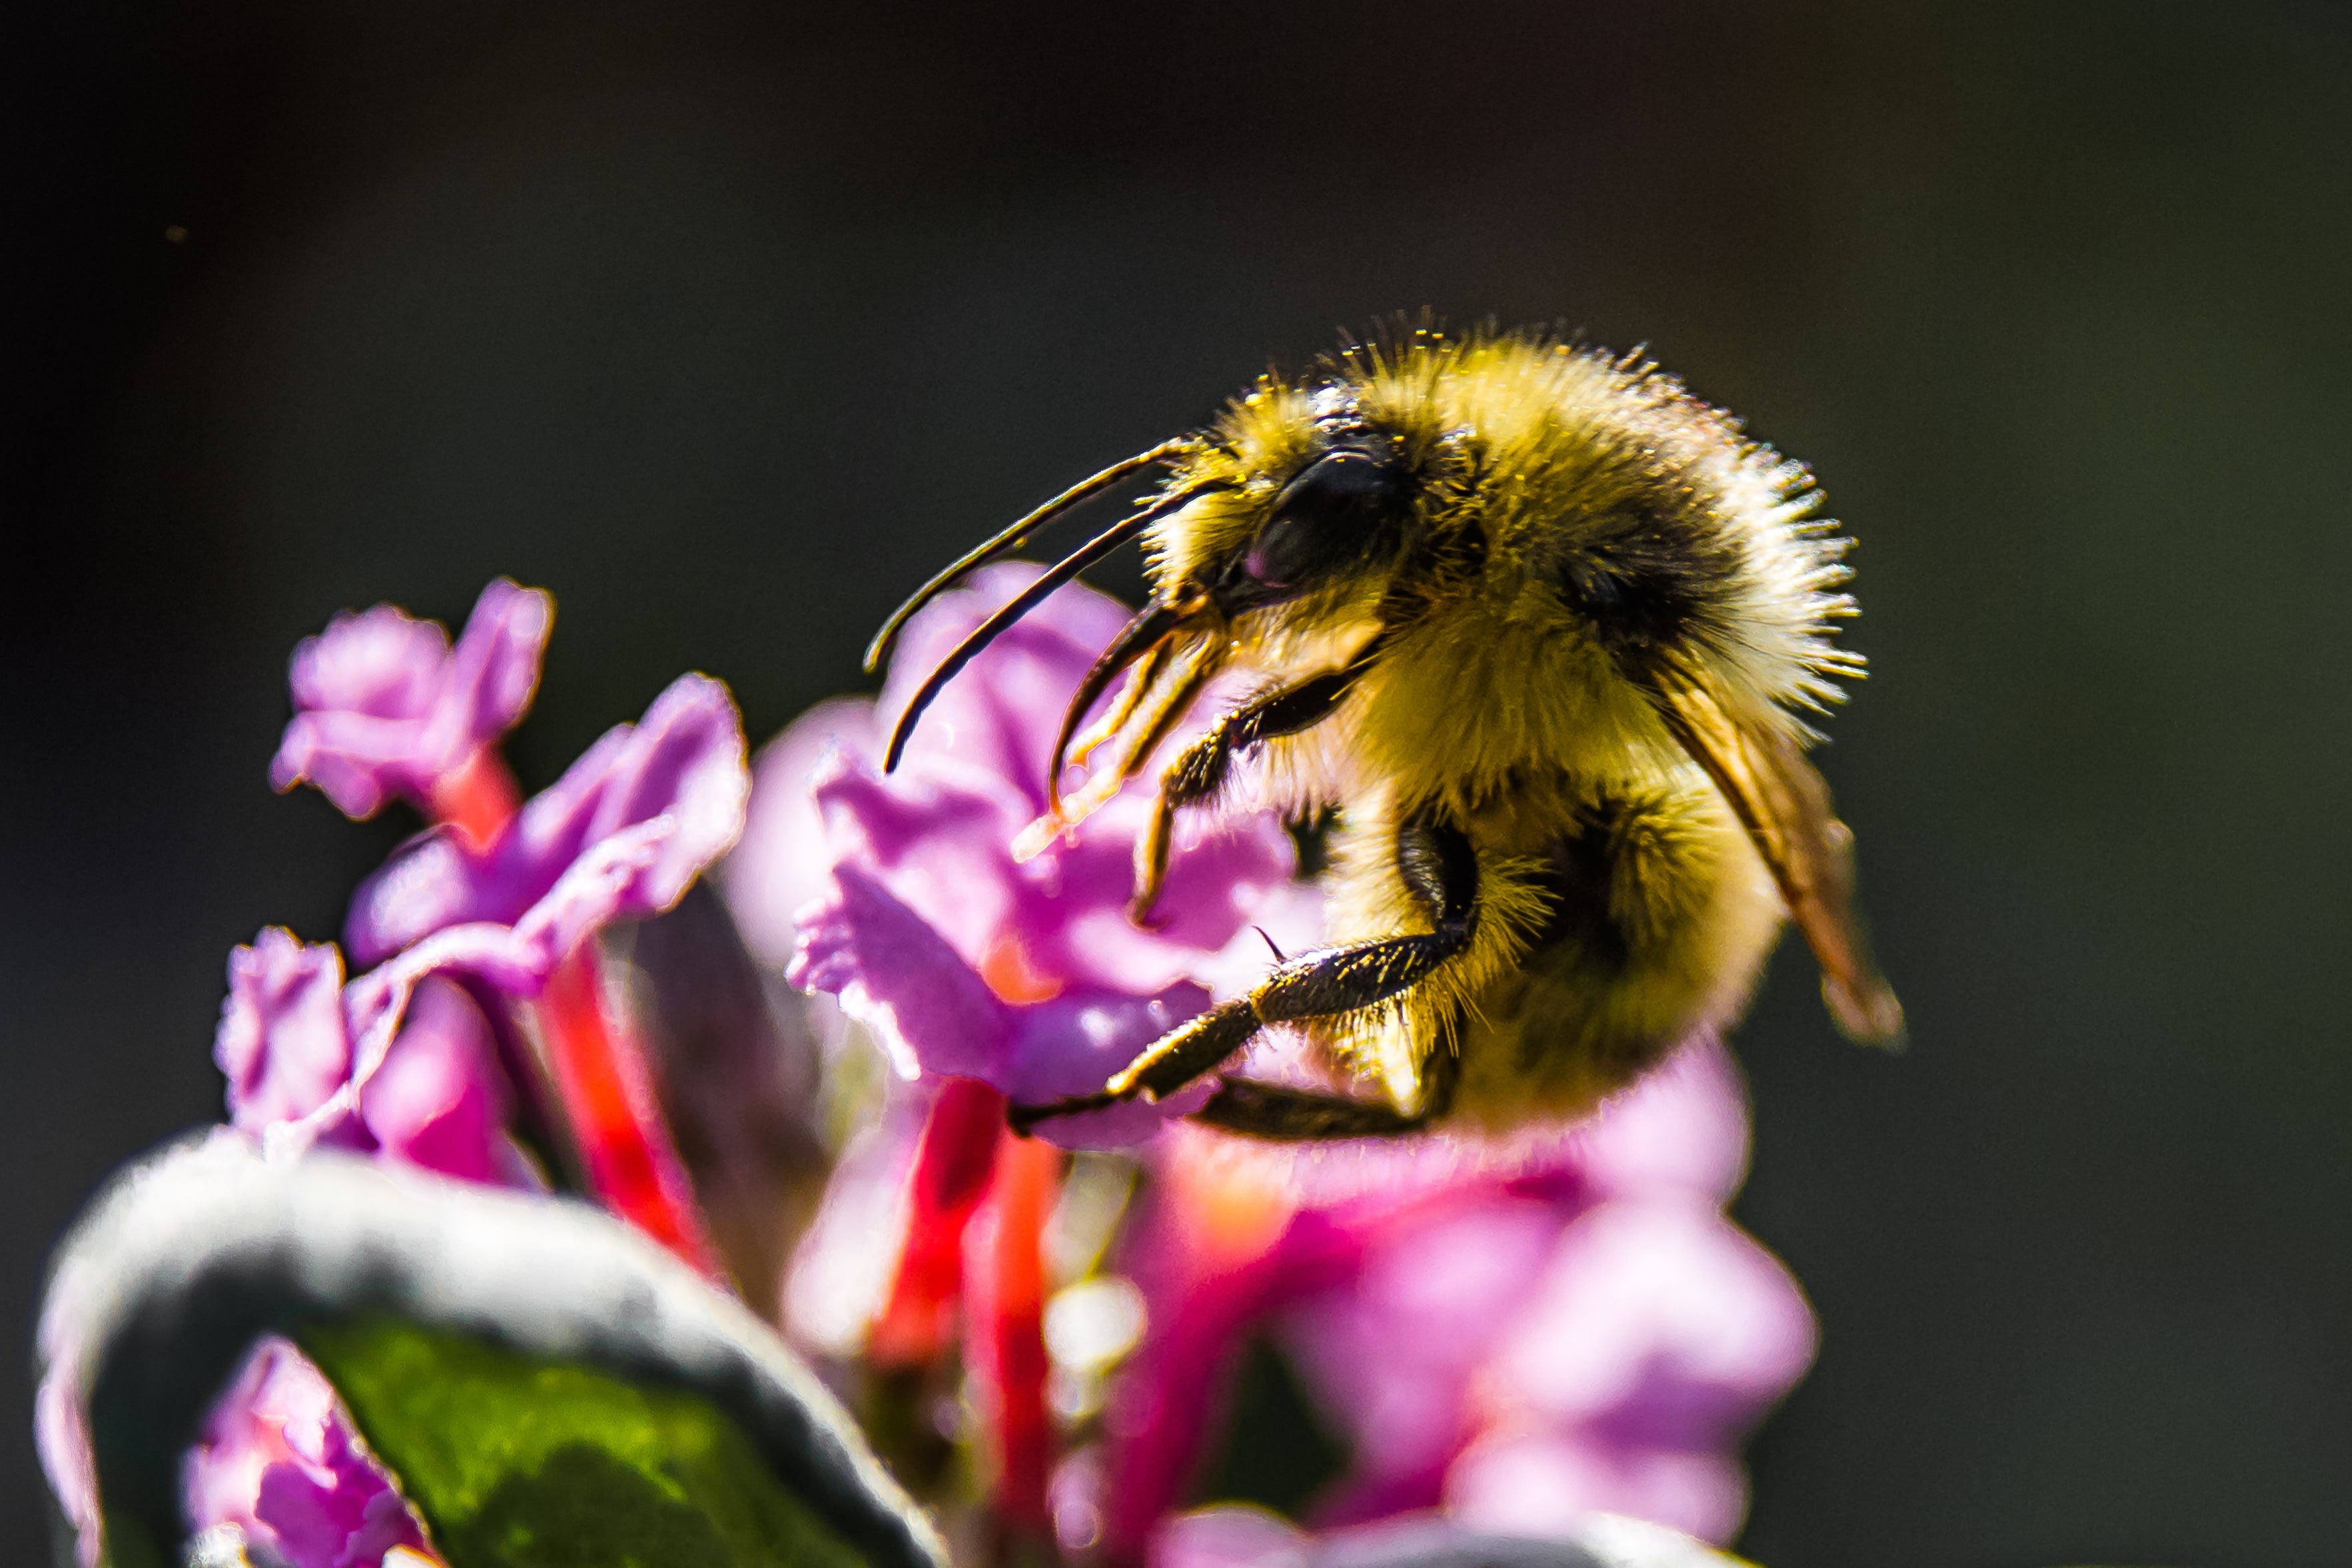 Why do bees have sticky hair? - Learn How To Talk To Animals